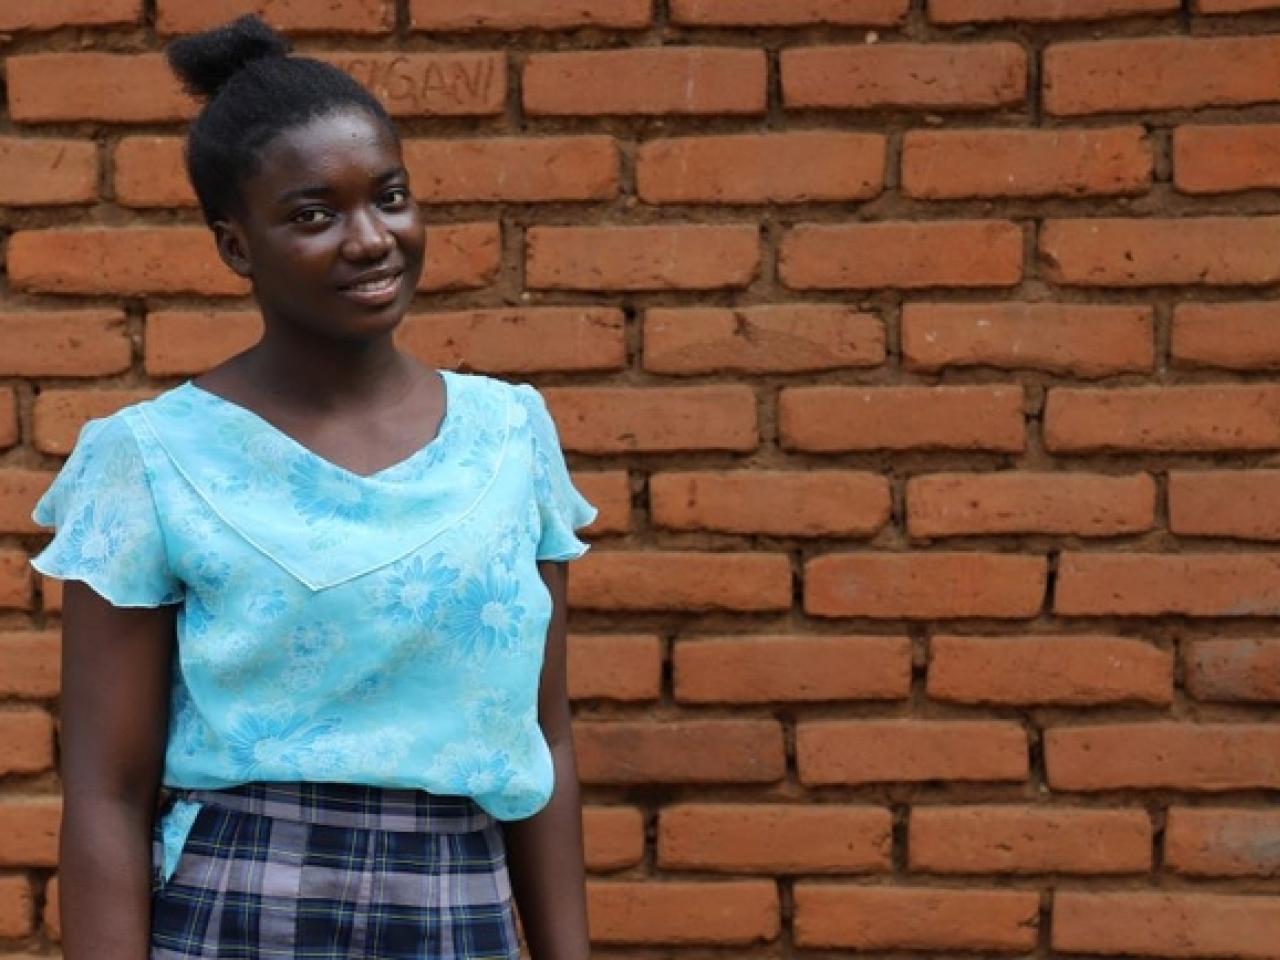 A girl in a blue shirt stands against brick background